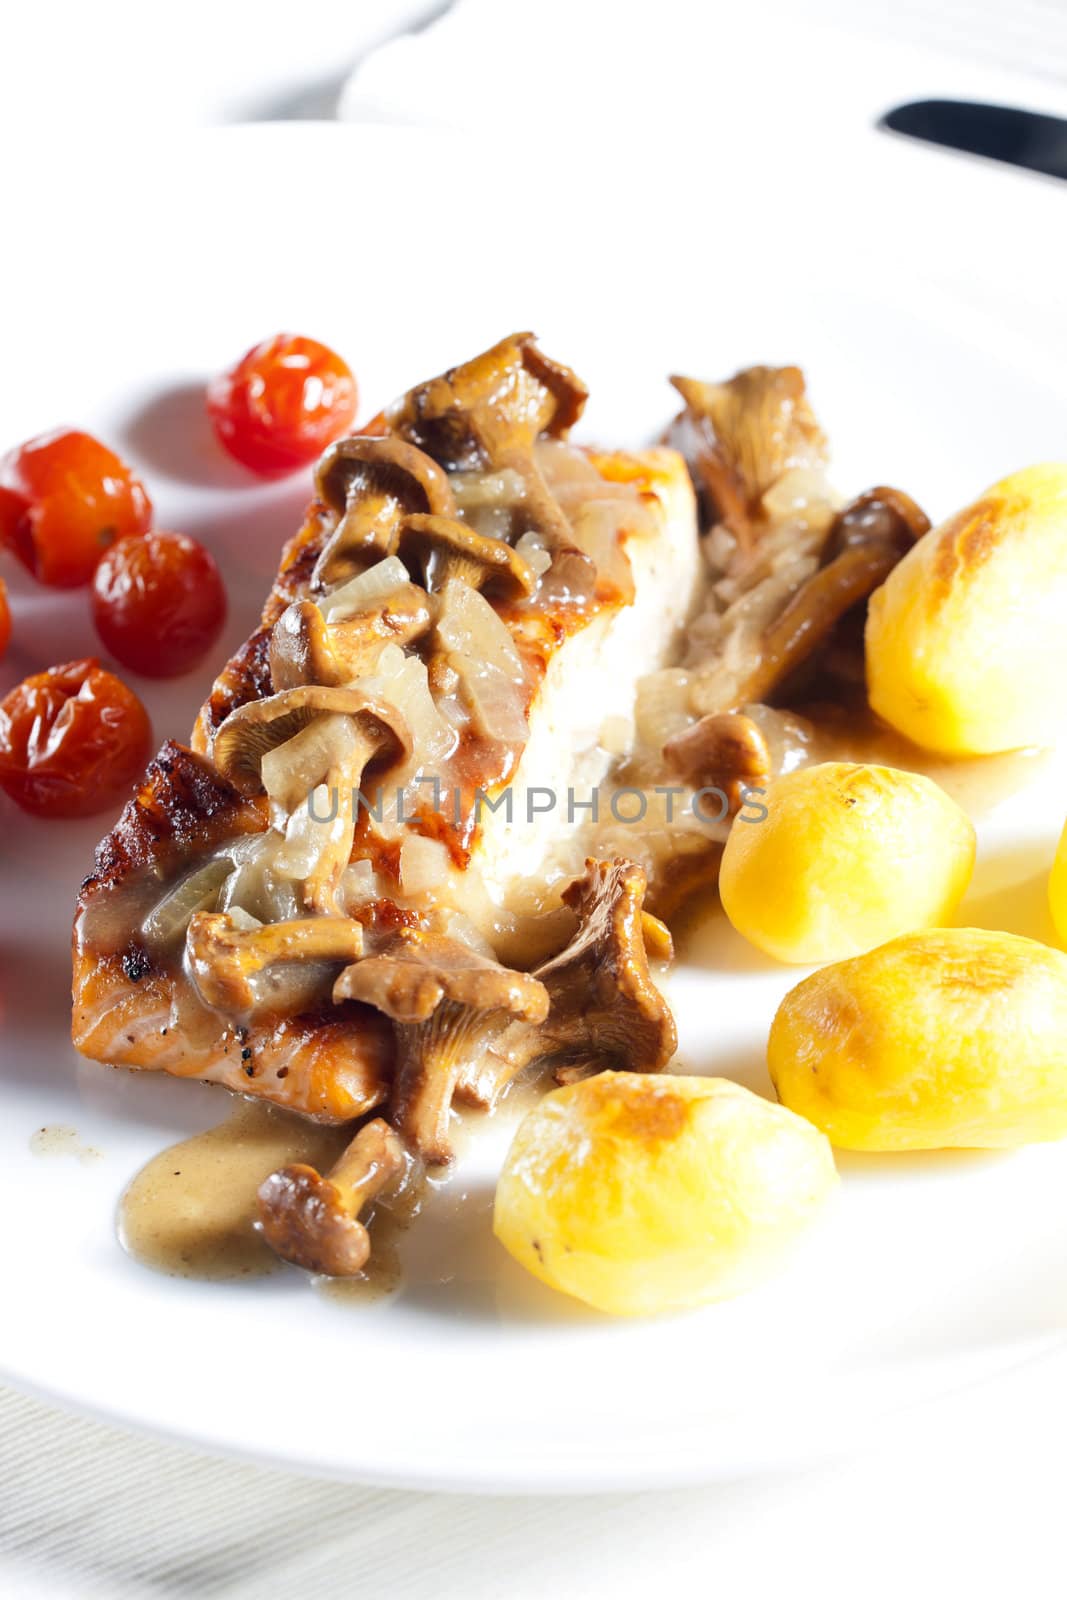 grilled salmon with mushrooms and cherry tomatoes